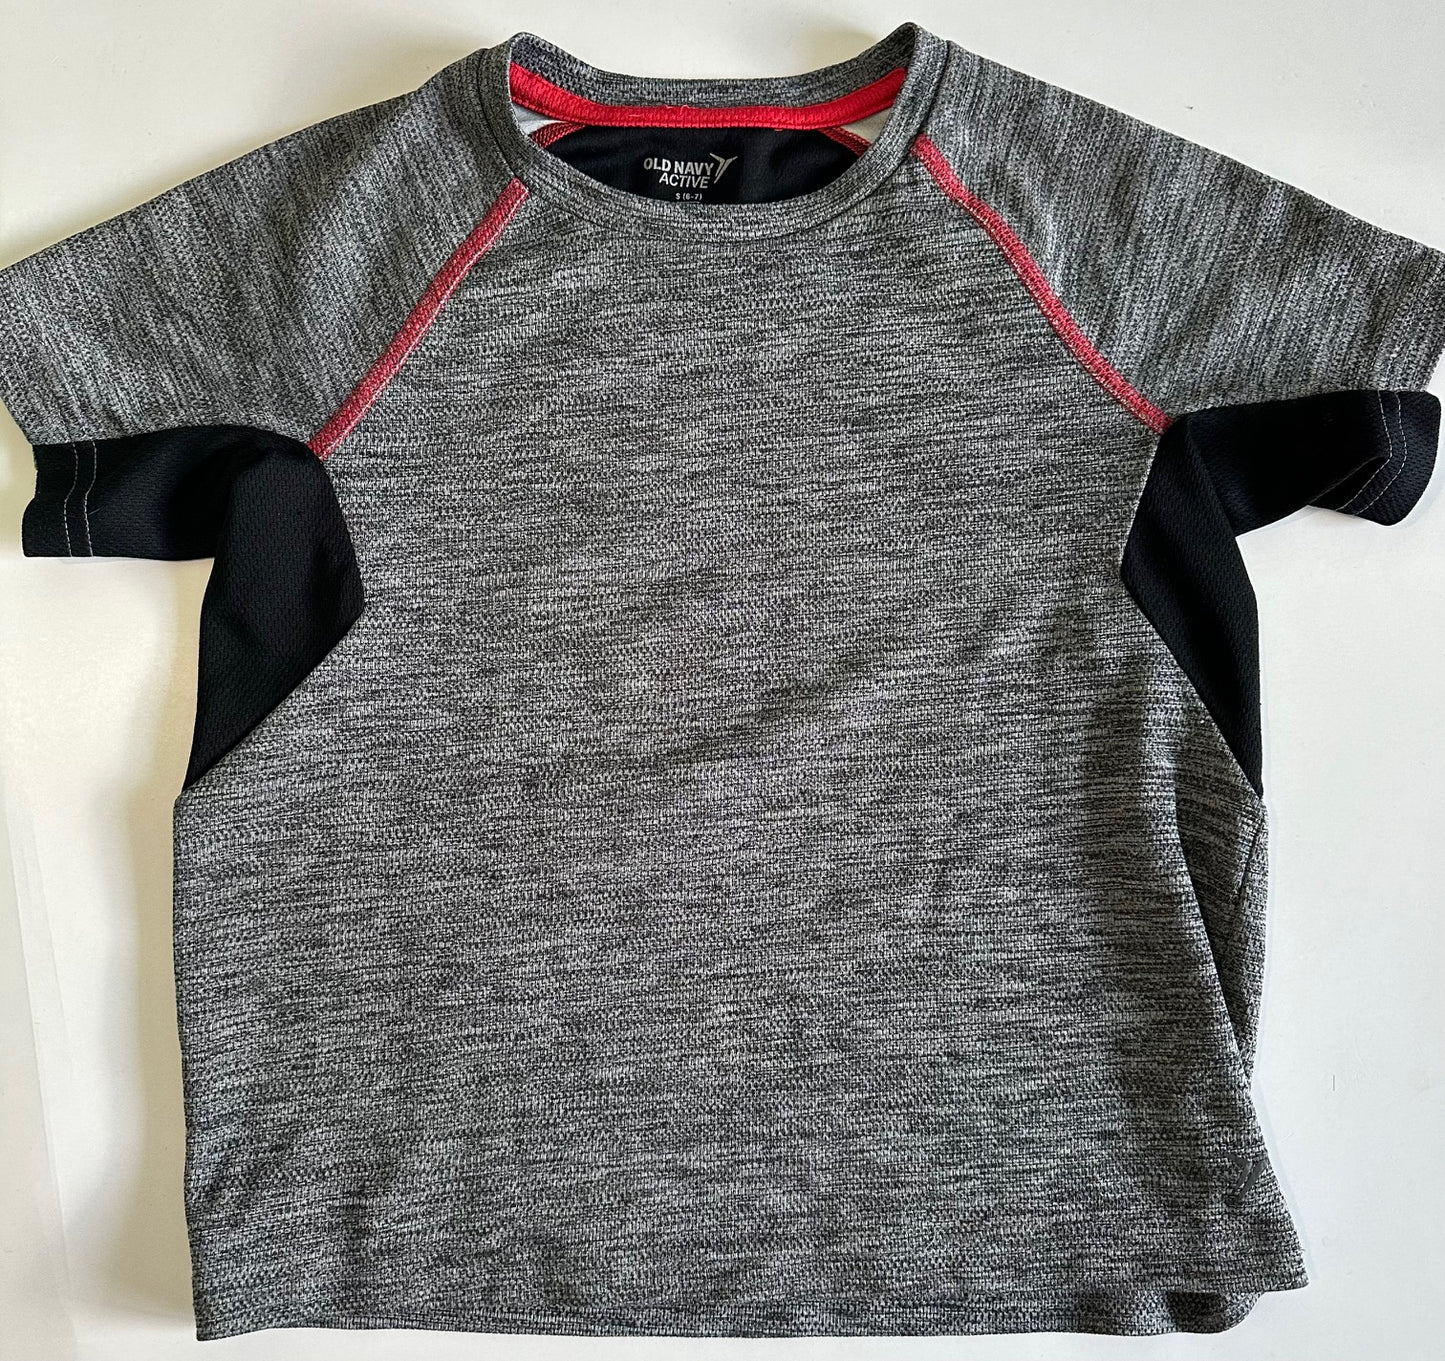 Old Navy, Grey Active T-Shirt - Size Small (6-7)